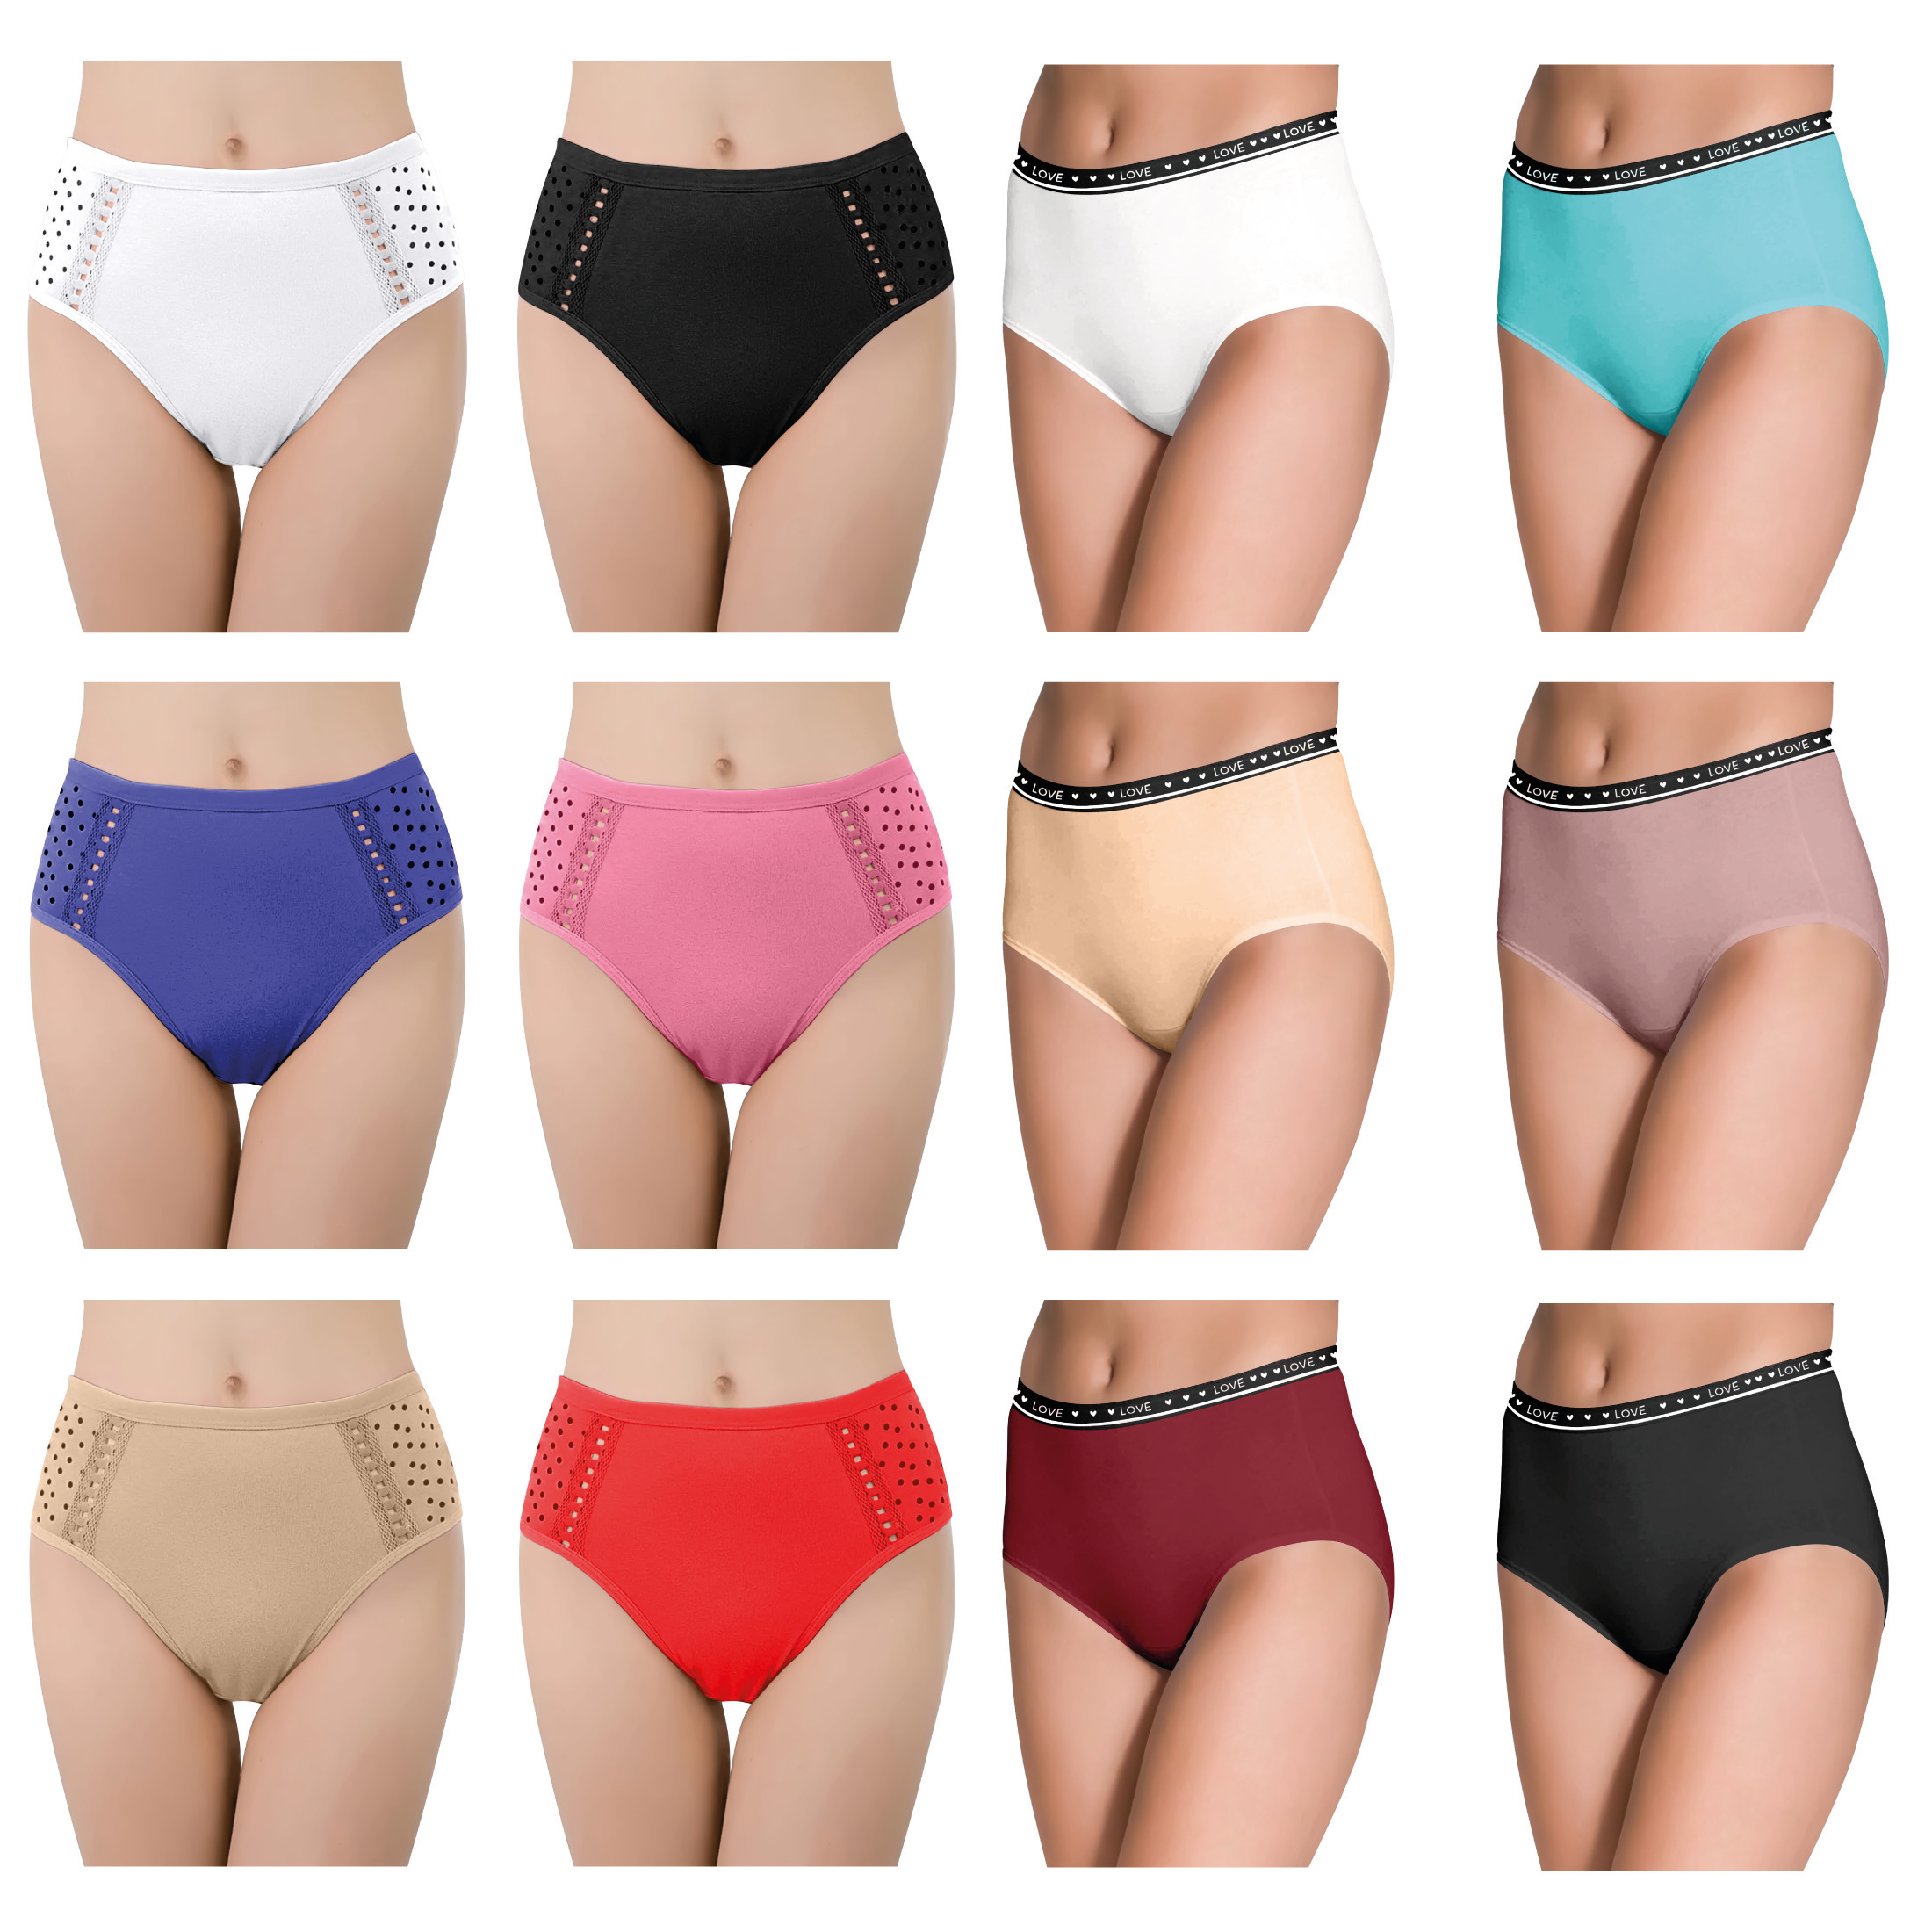 6-Pack: Women's Ultra Soft Moisture Wicking Panties Cotton Perfect Fit Underwear (Plus Sizes Available ) - X-Large